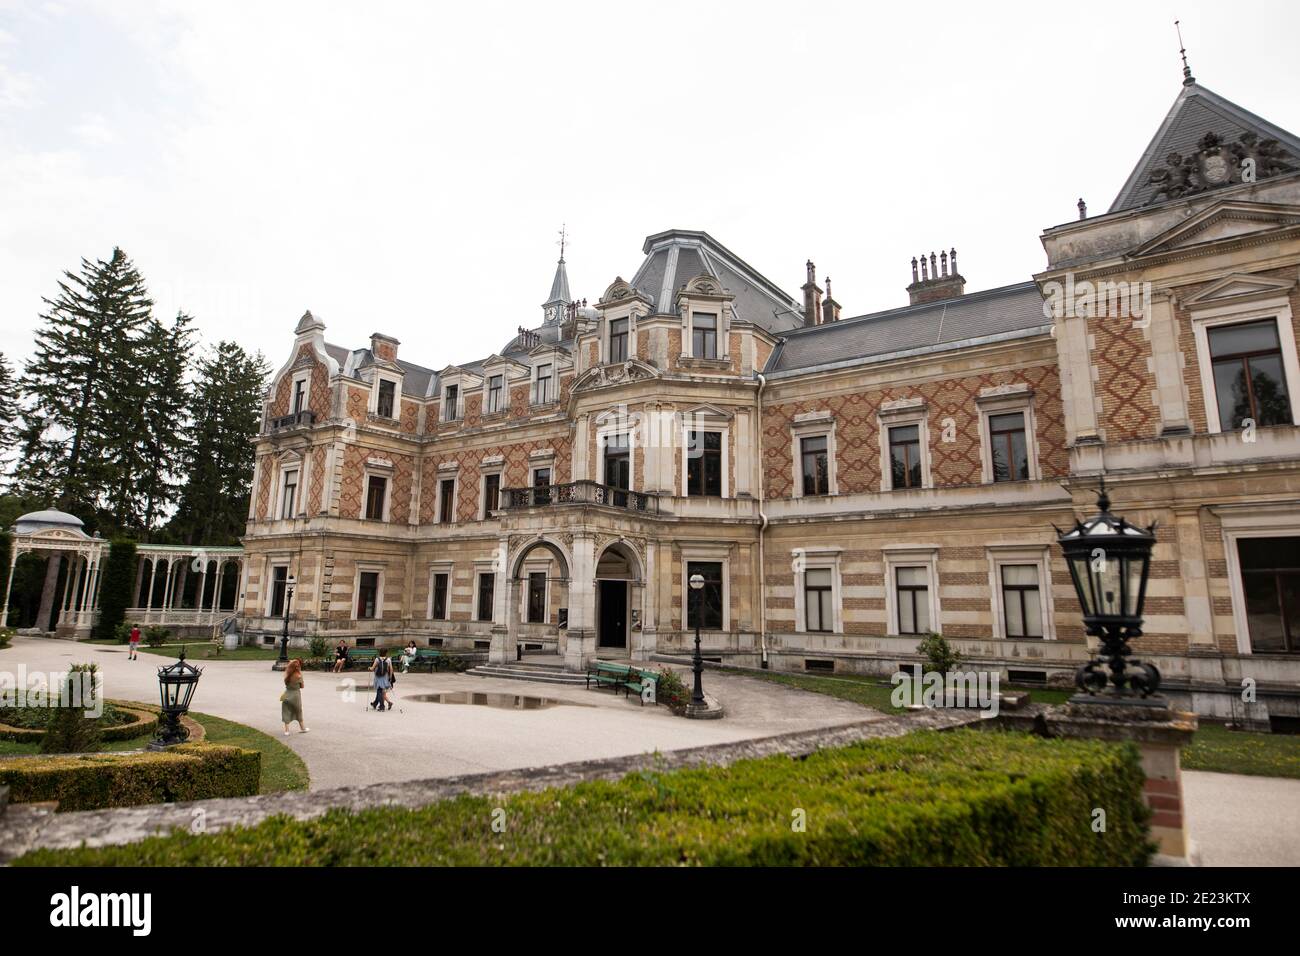 The Hermesvilla, the country house of Habsburg Empress Elisabeth (Sisi) from the late nineteenth century, on the outskirts of Vienna, Austria. Stock Photo